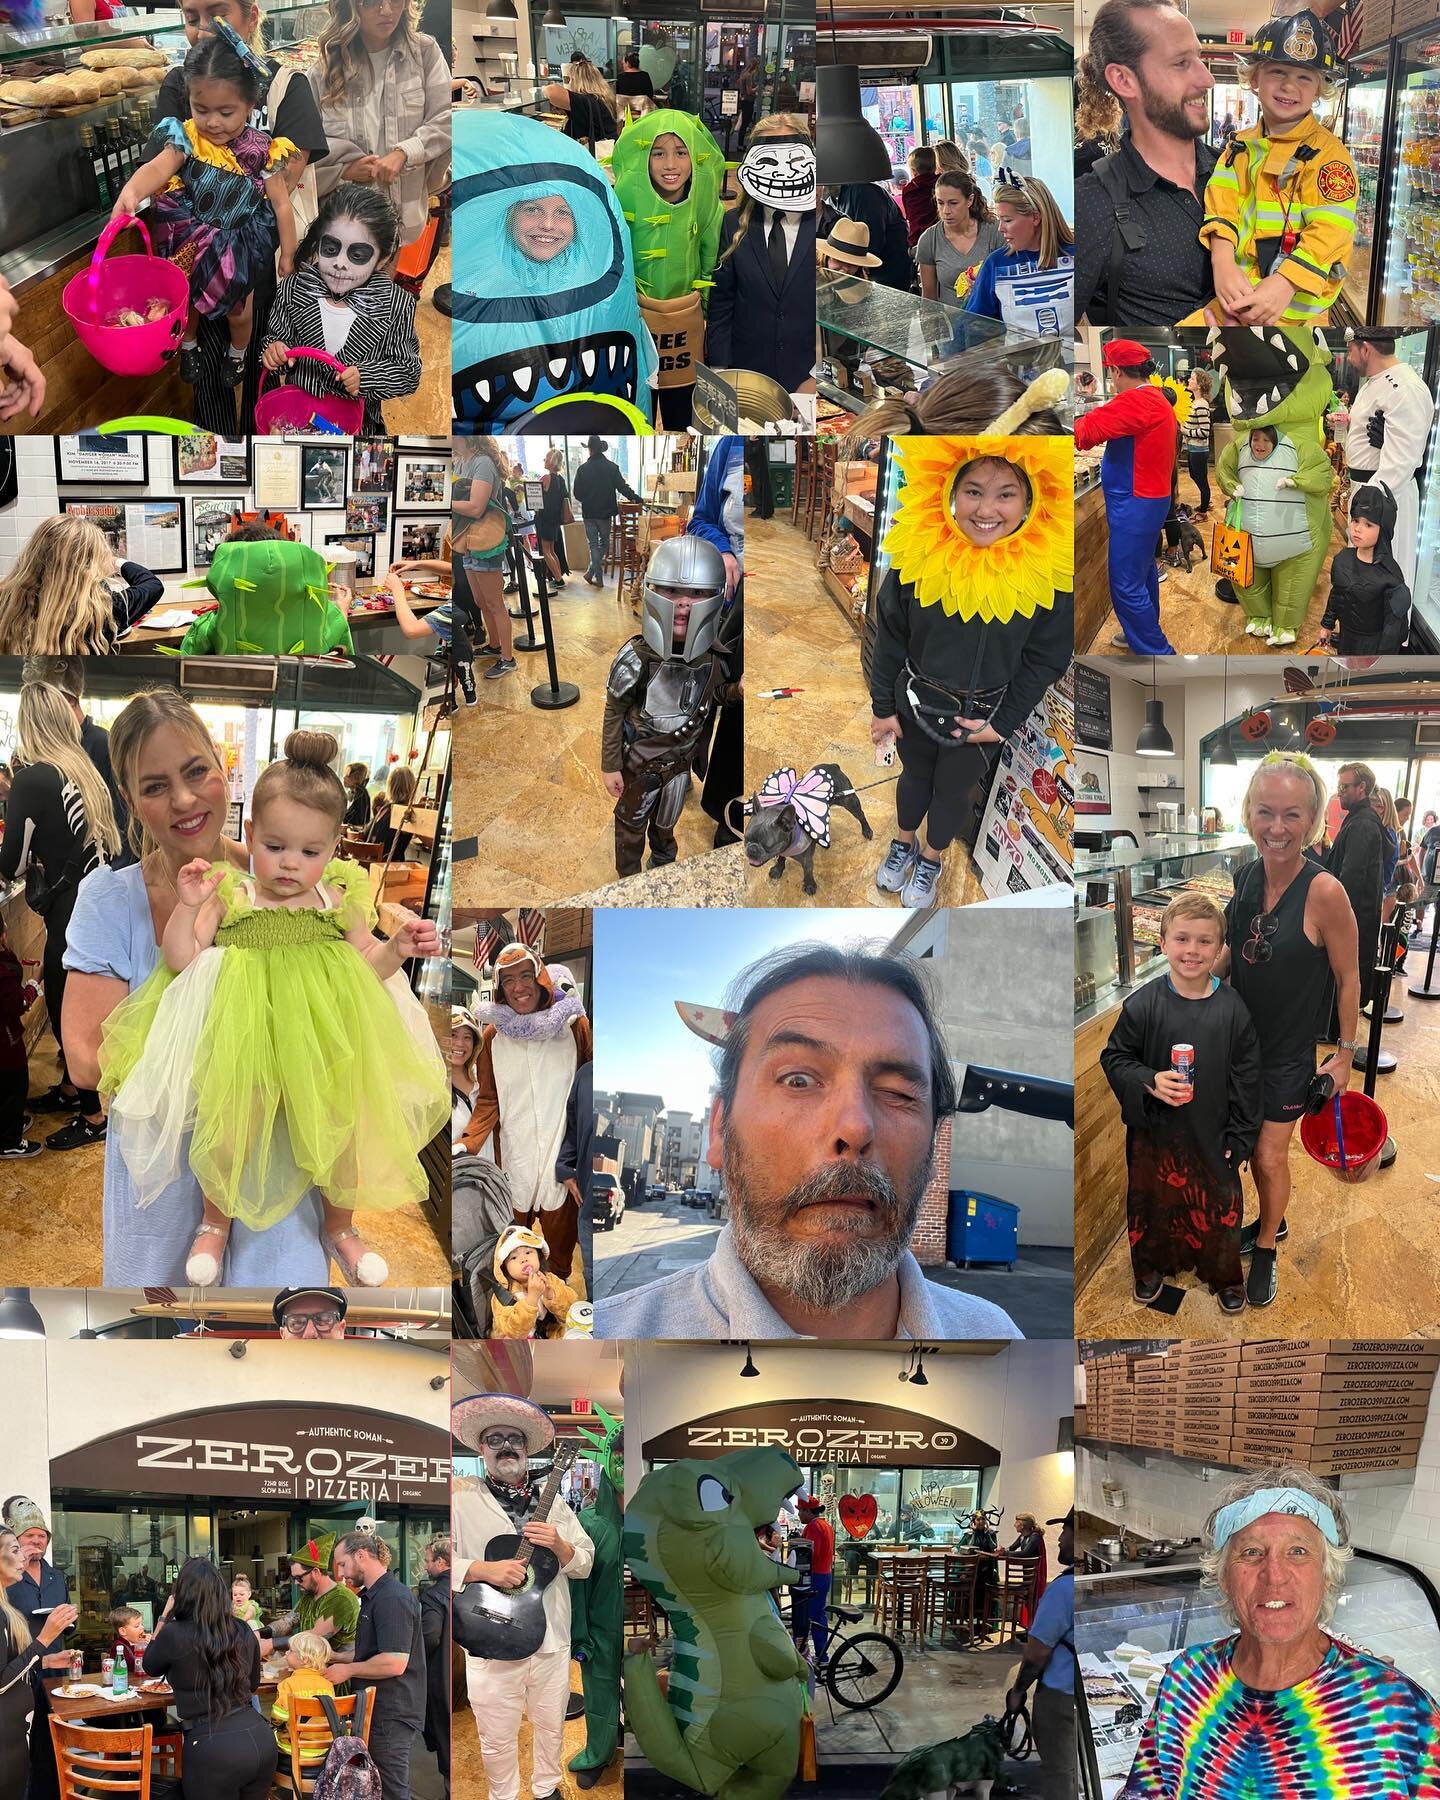 It was a great #halloween #downtown #huntingtonbeach at #zerozero39pizzeria , so many #family enjoy #familytime in a great environment!!
Thank to #hbpd for the great job and Tks to the #cityofhuntingtonbeach for the nice set up!!! As a #familybusines